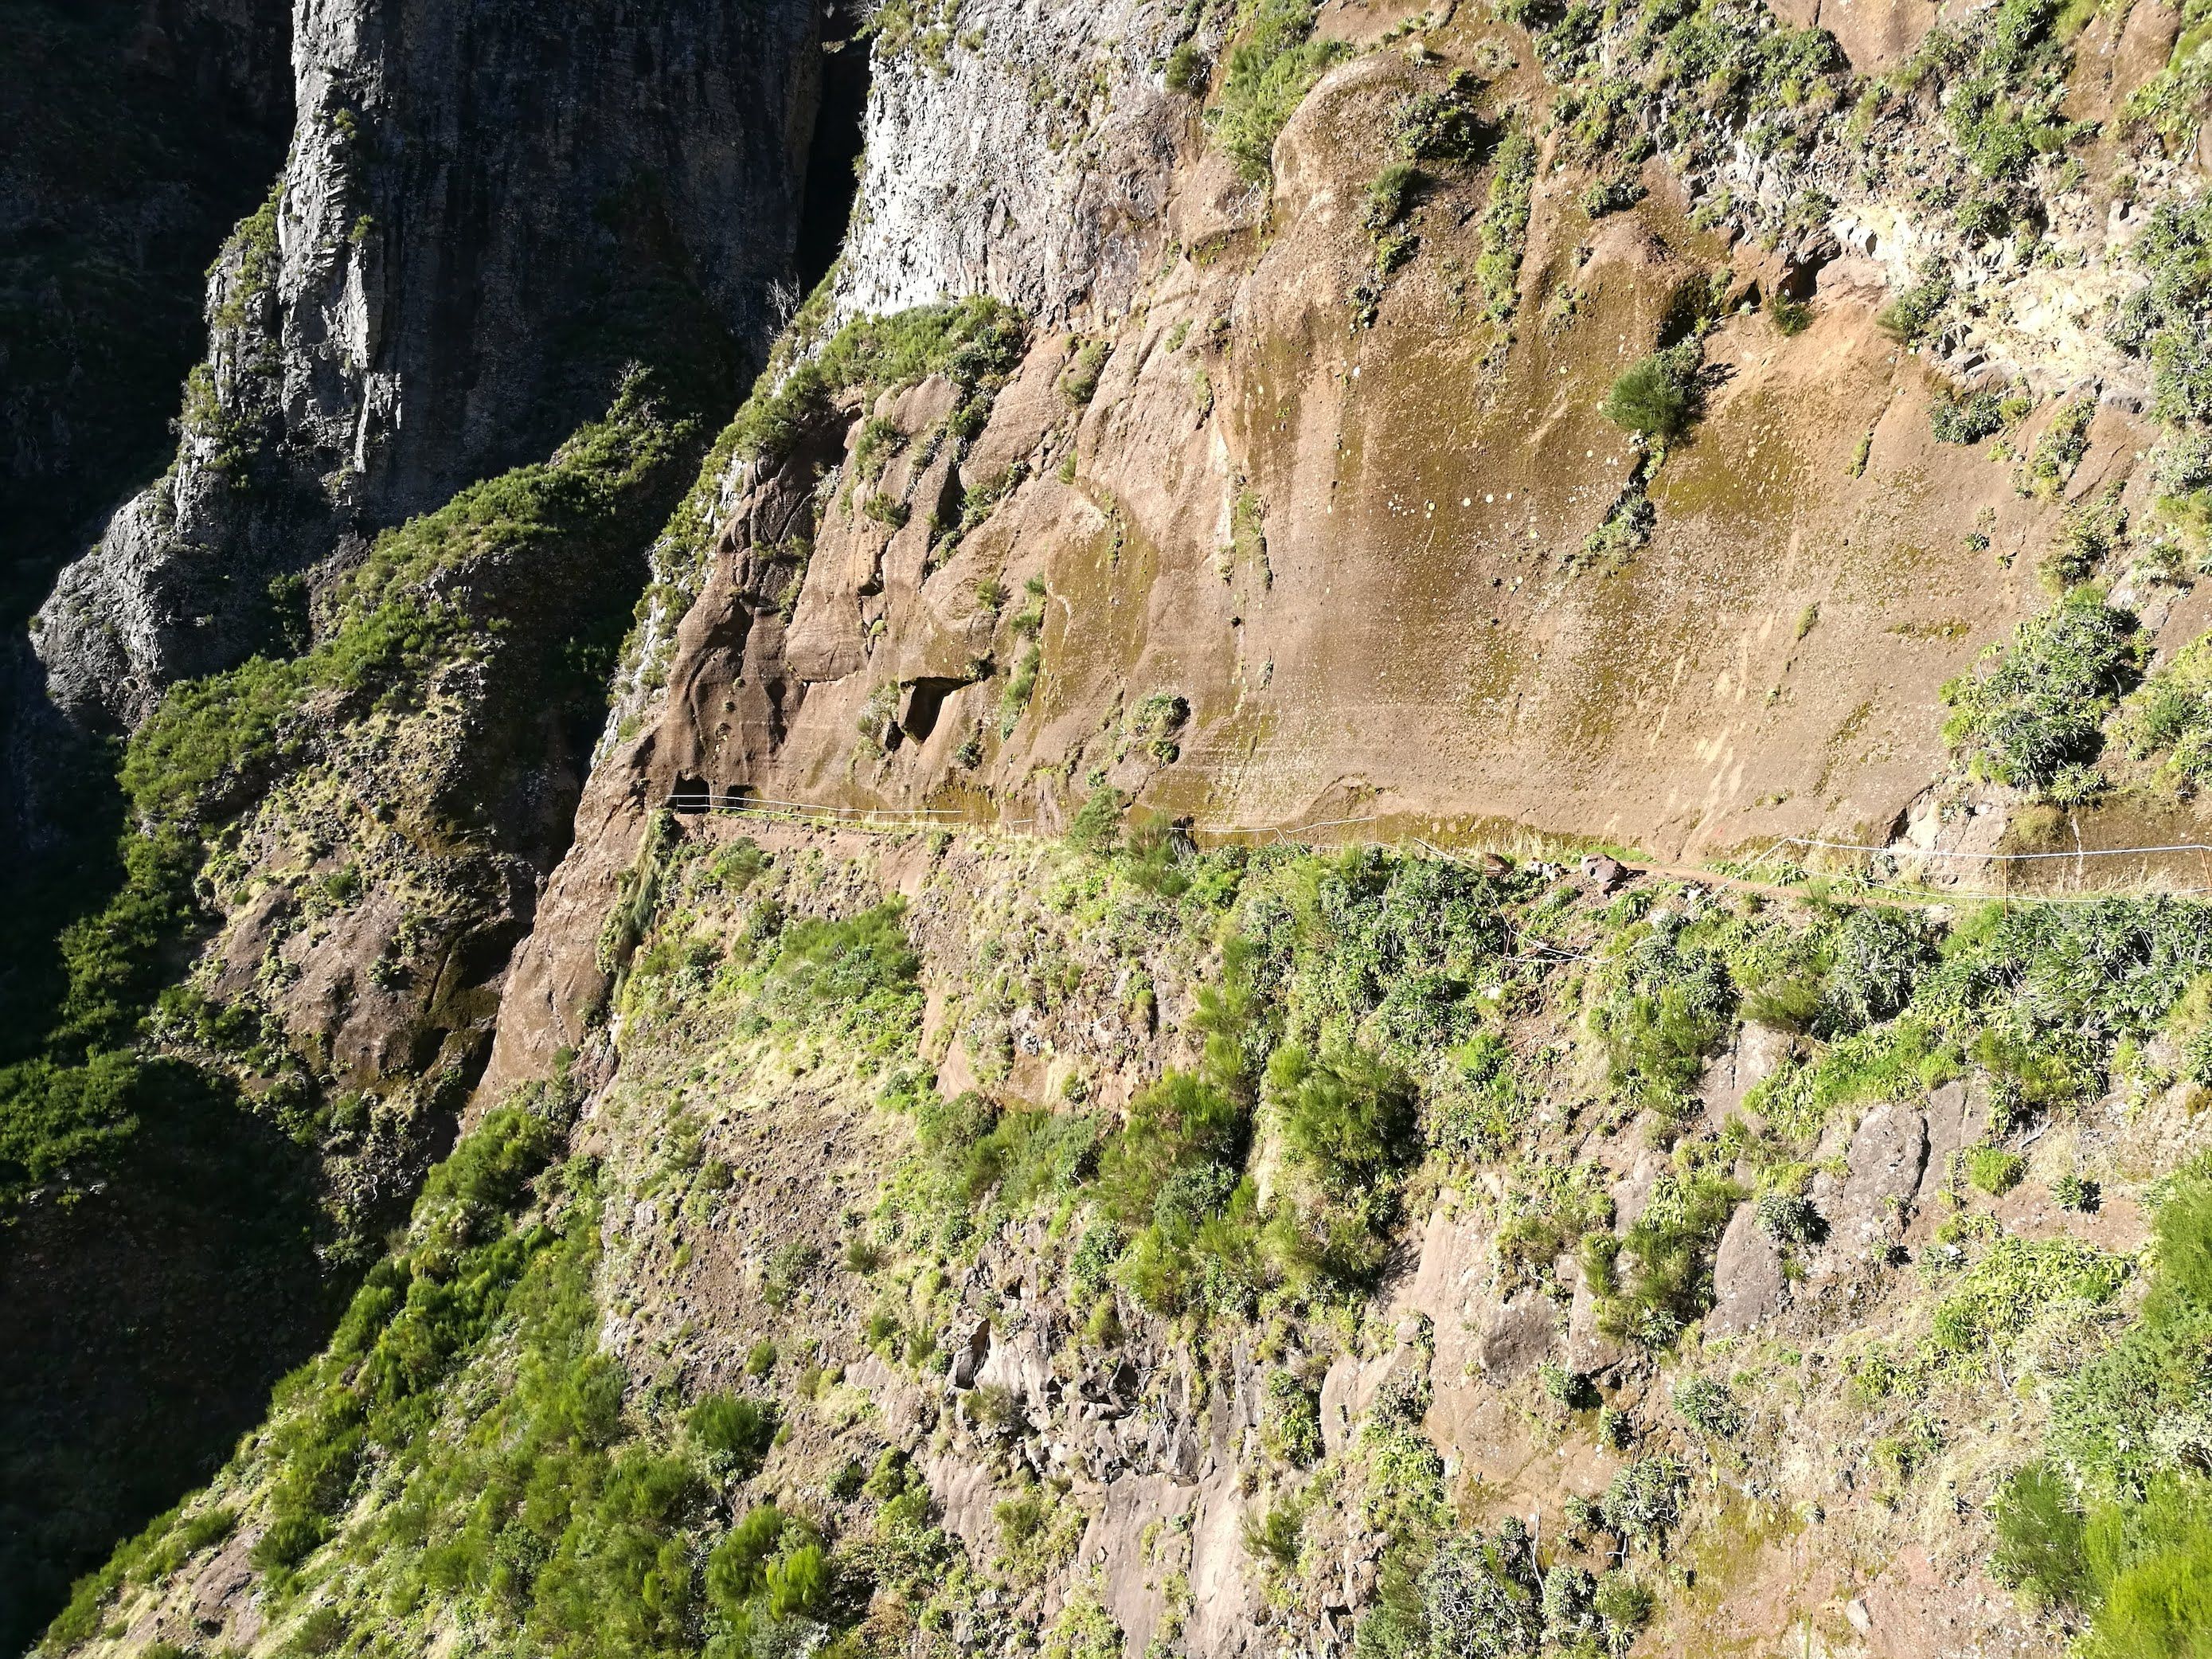 A section of the route leads on a ledge carved into the sheer cliff and ends in a tunnel